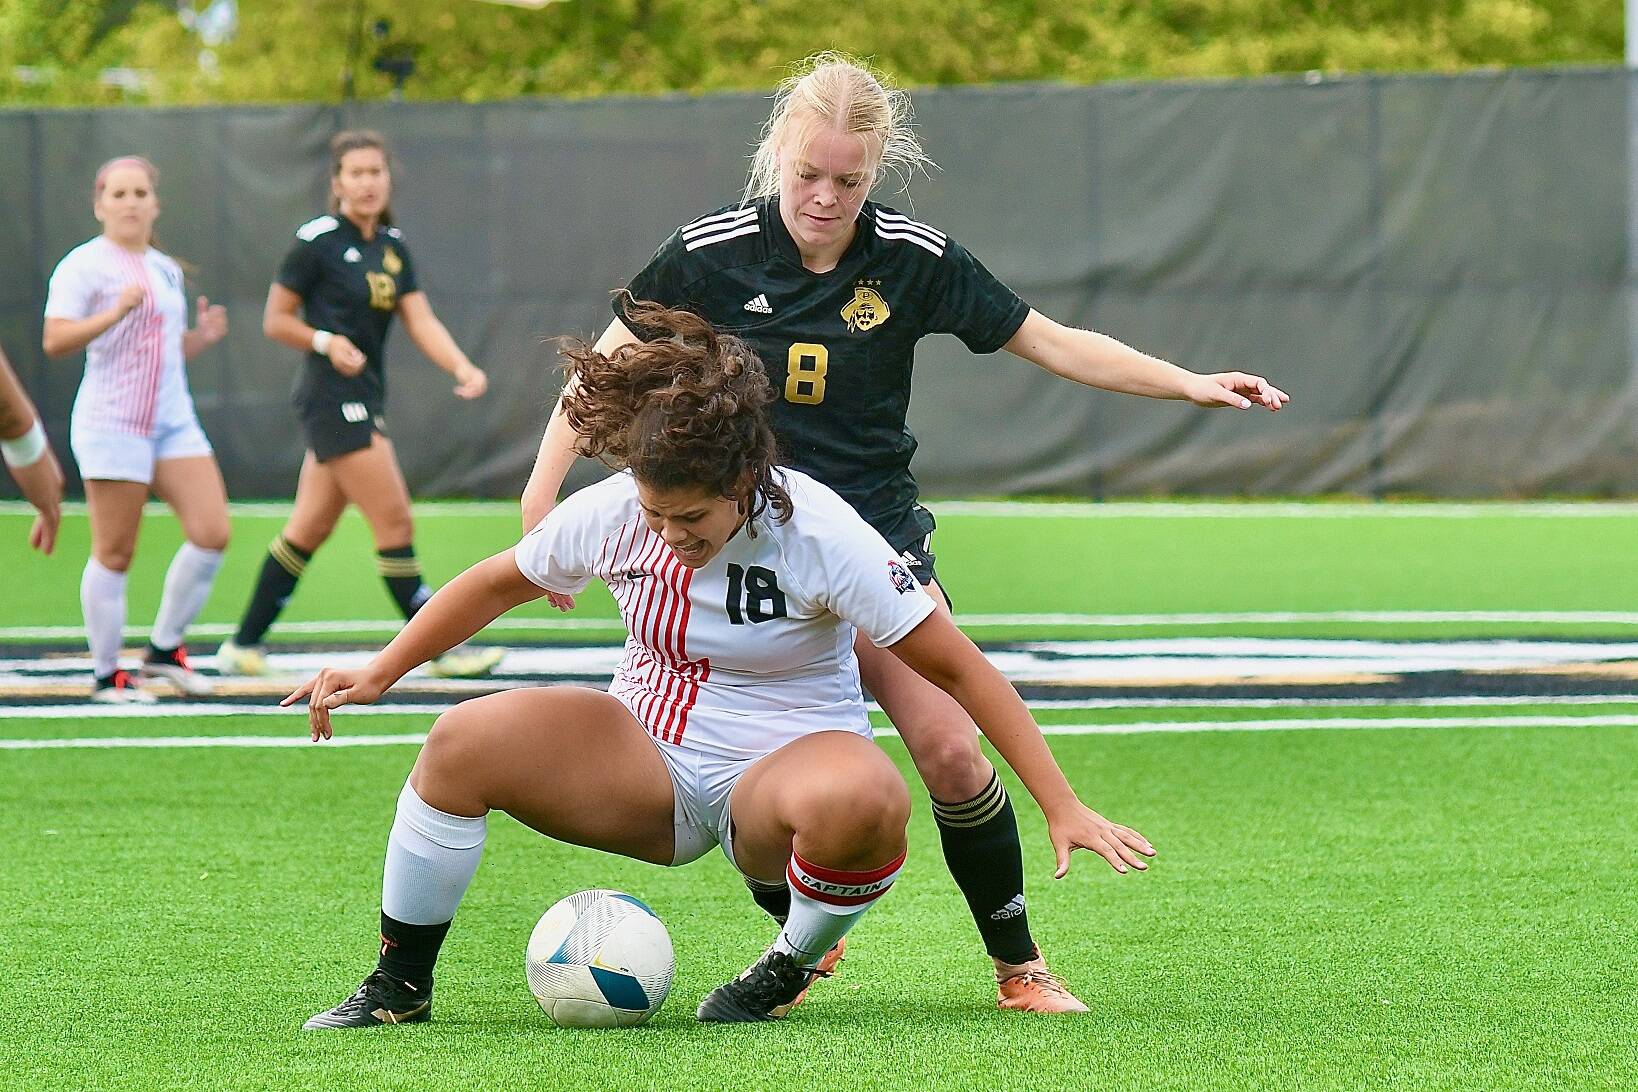 Peninsula College's Anna Petty (8) battles with Everett's Miah Manibusan (18) over possession of the ball in Wednesday's match at Wally Sigmar Field. Petty had two goals and an assist in an 11-0 Peninsula victory. (Jay Cline/Peninsula College)